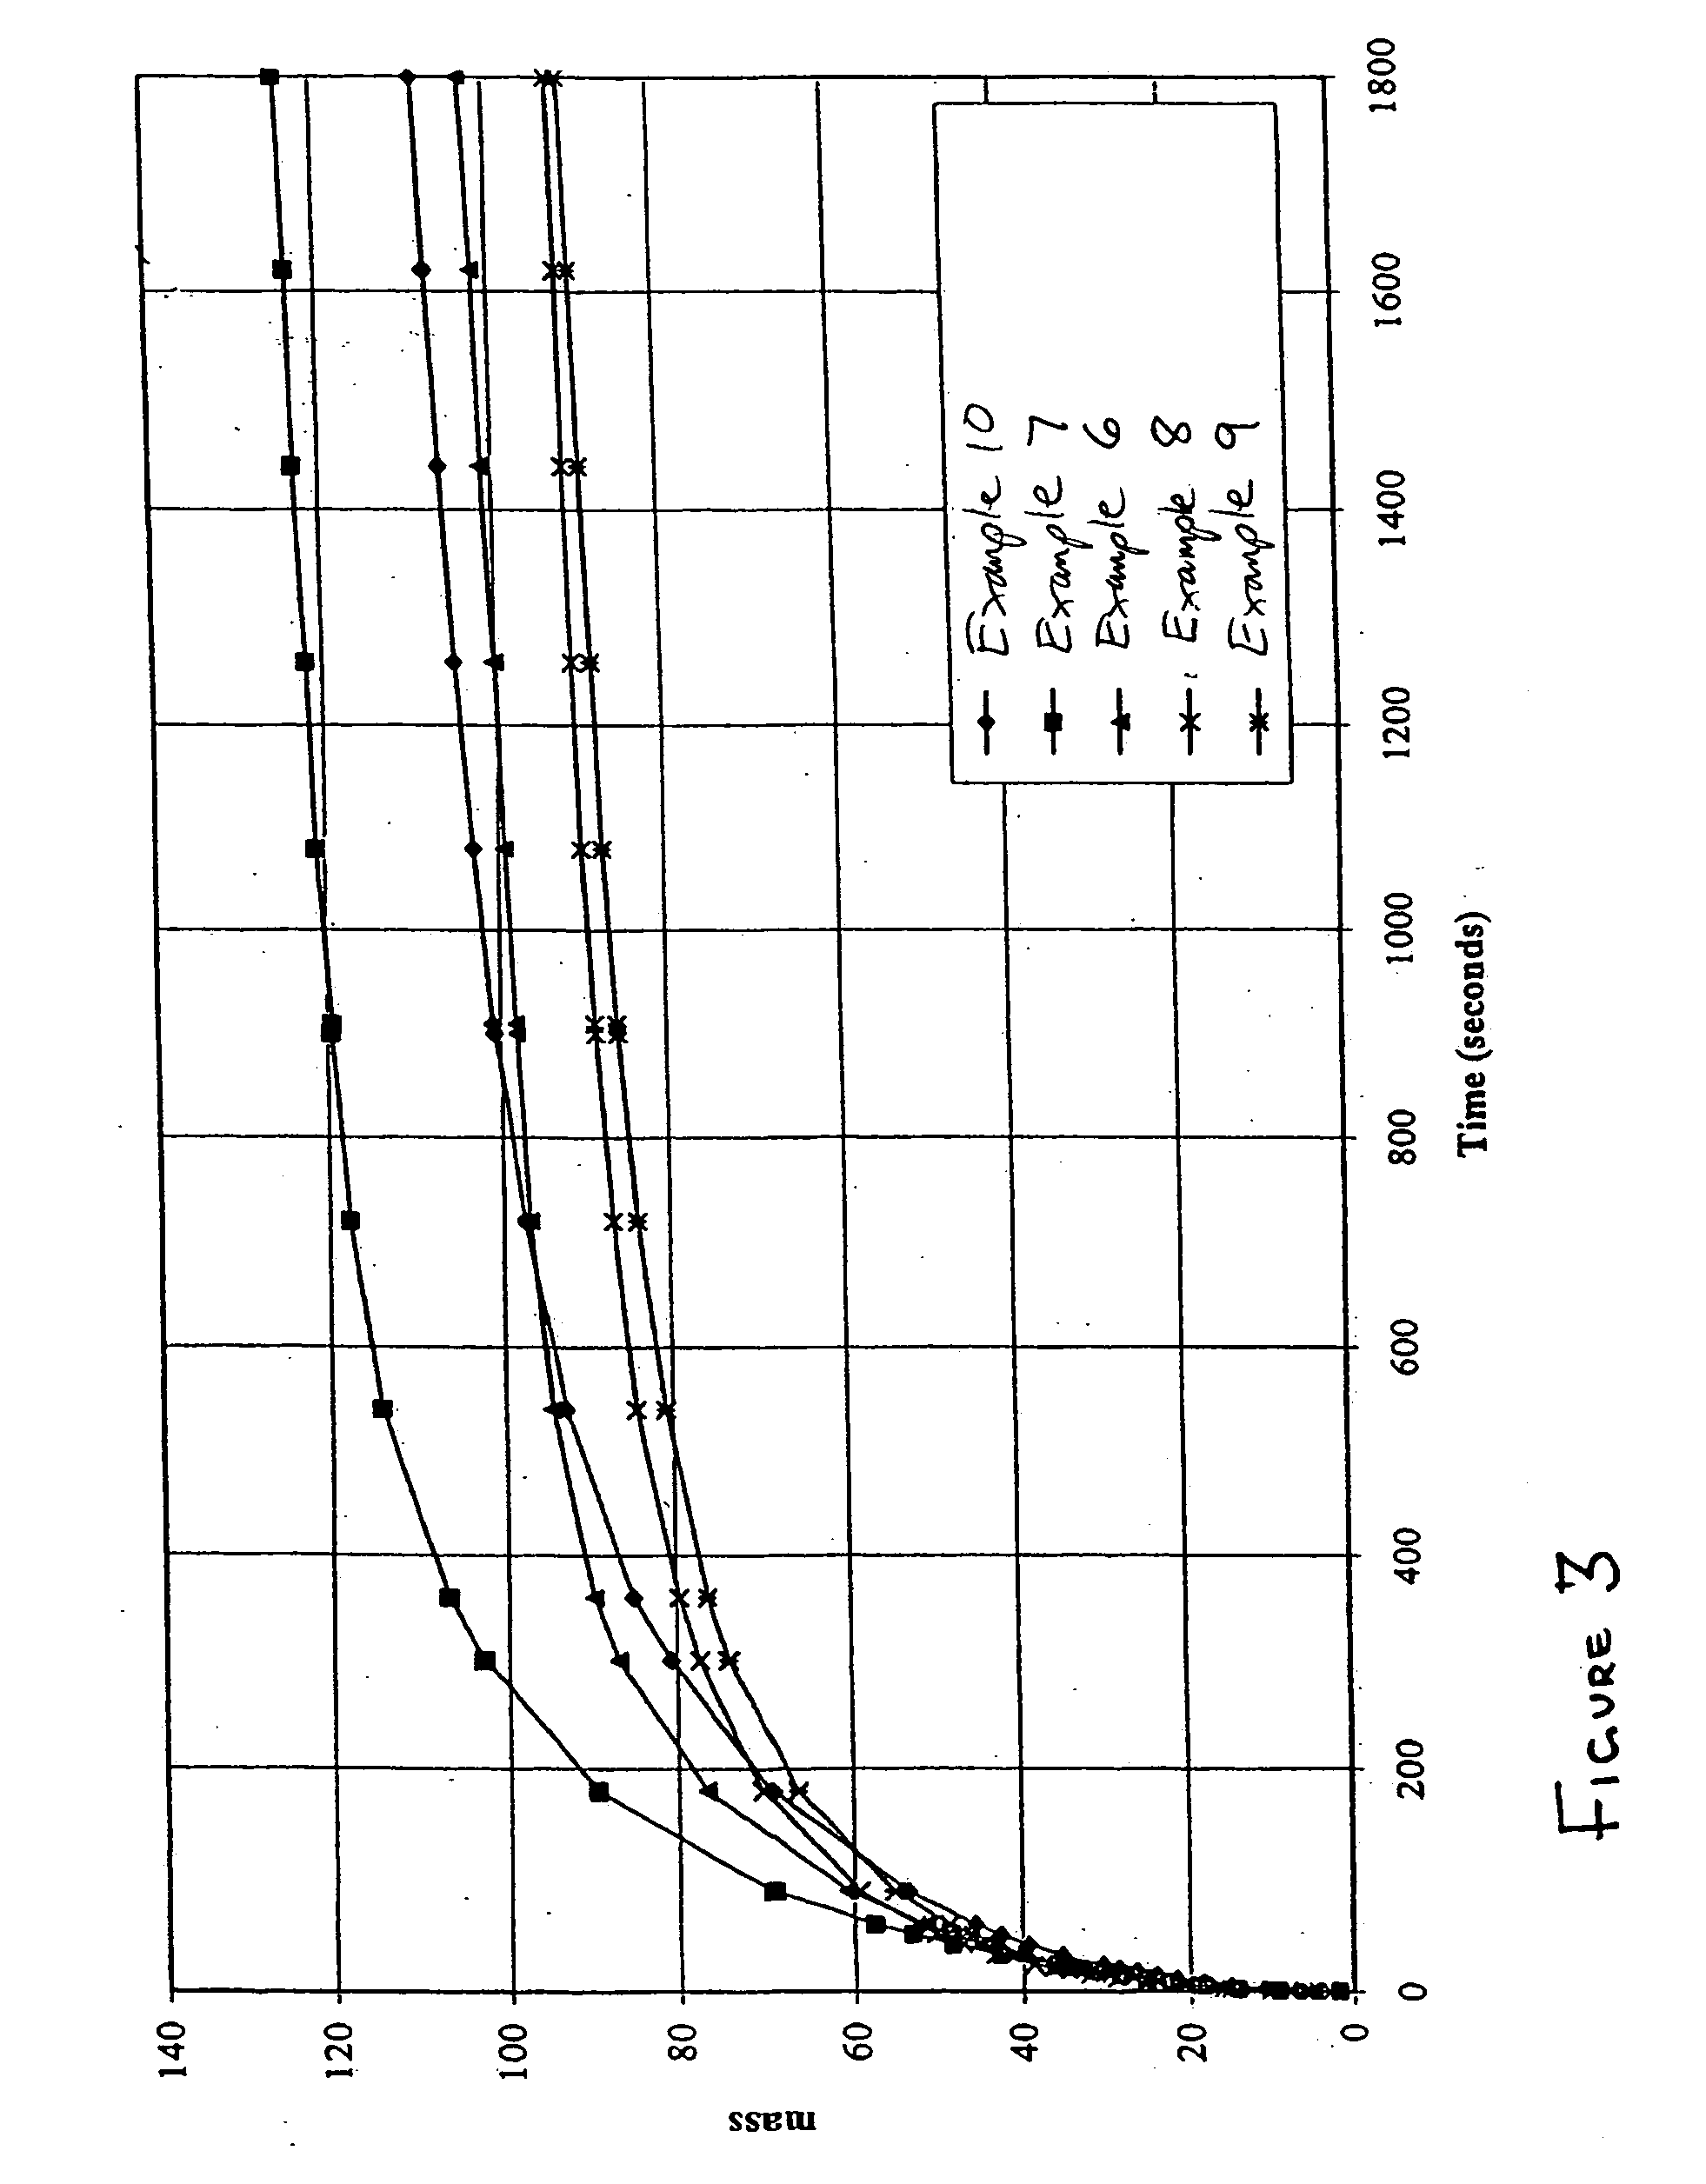 Absorbent composites containing biodegradable reinforcing fibers